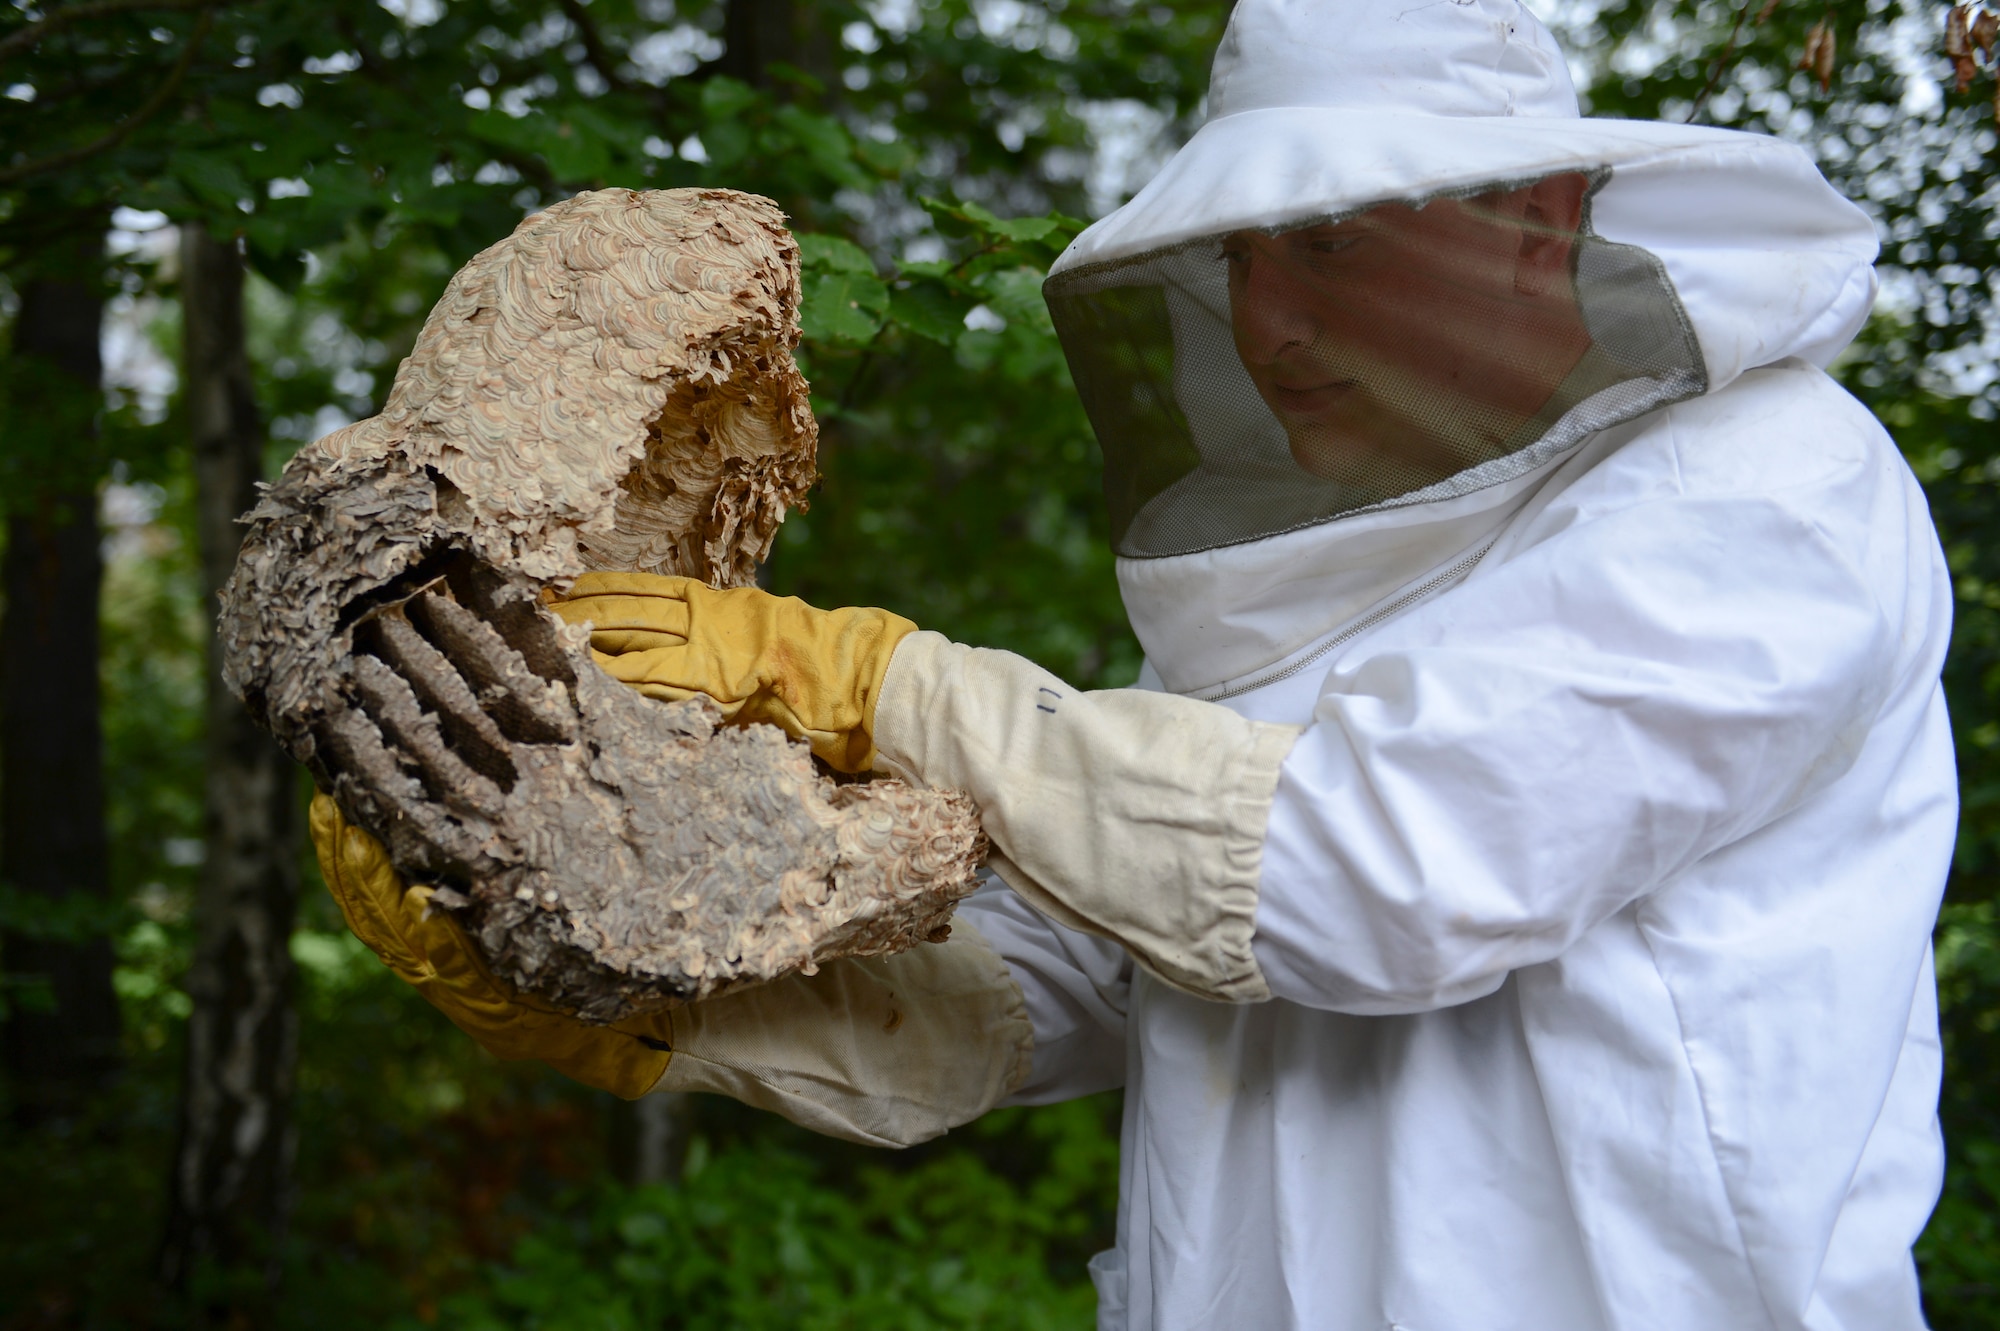 Senior Airman Jonathan Roland, 786th Civil Engineer Squadron pest management journeyman, handles a wasp’s nest on Ramstein Air Base, Germany, July 29, 2014. Pest management conducts base-wide inspections, preventative maintenance and gets rid of unwanted pests on the installation. (U.S. Air Force photo/Airman 1st Class Michael Stuart)